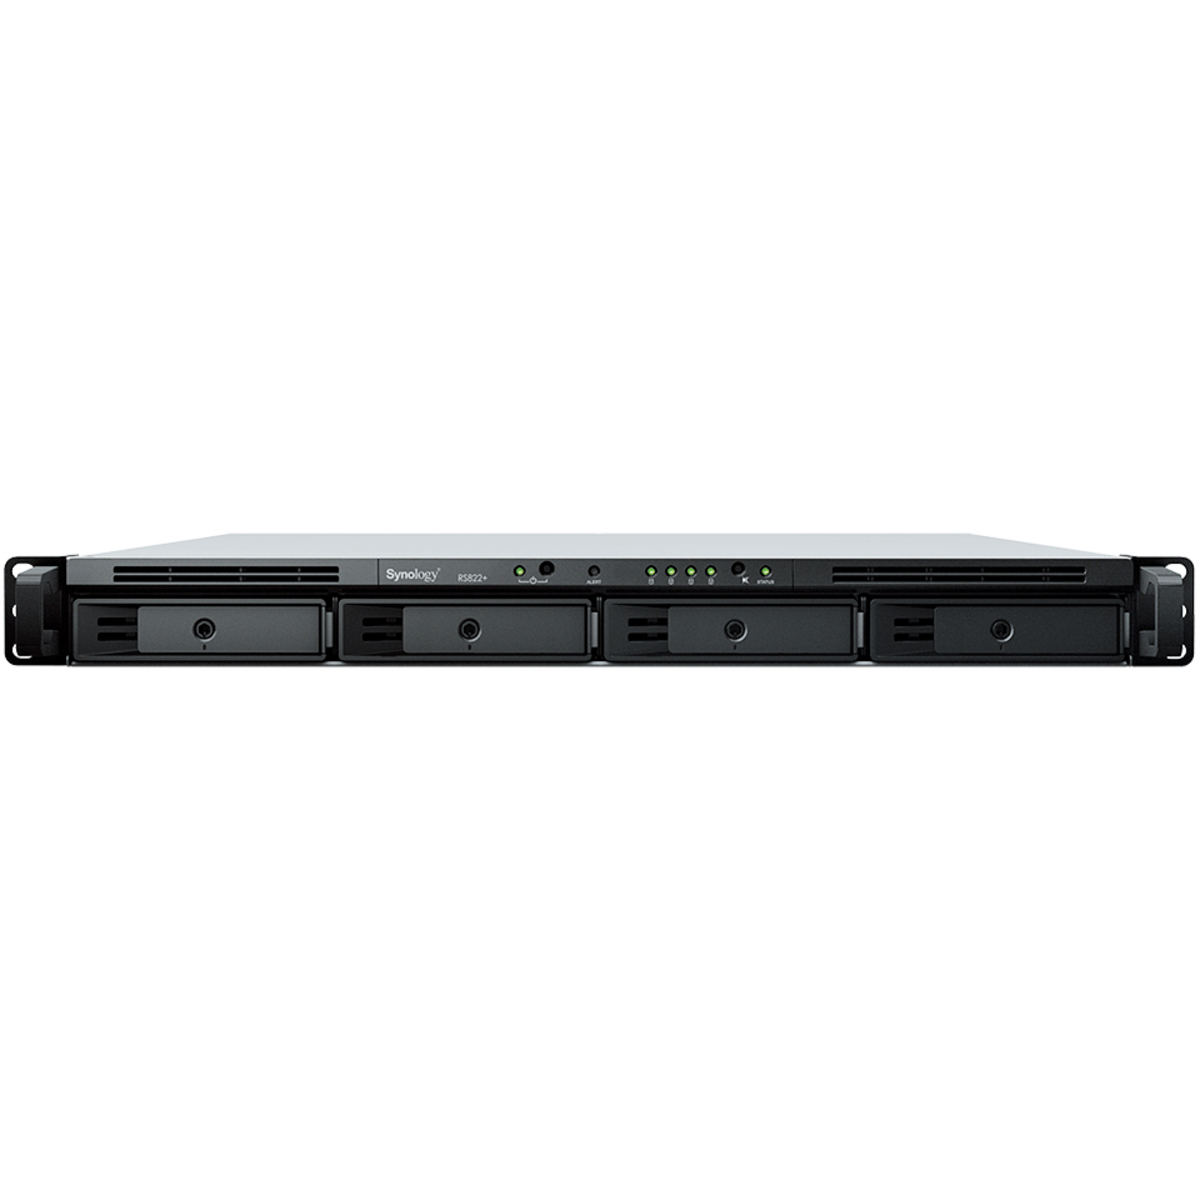 Synology RackStation RS822+ 32tb 4-Bay RackMount Multimedia / Power User / Business NAS - Network Attached Storage Device 4x8tb Western Digital Red Plus WD80EFPX 3.5 7200rpm SATA 6Gb/s HDD NAS Class Drives Installed - Burn-In Tested RackStation RS822+